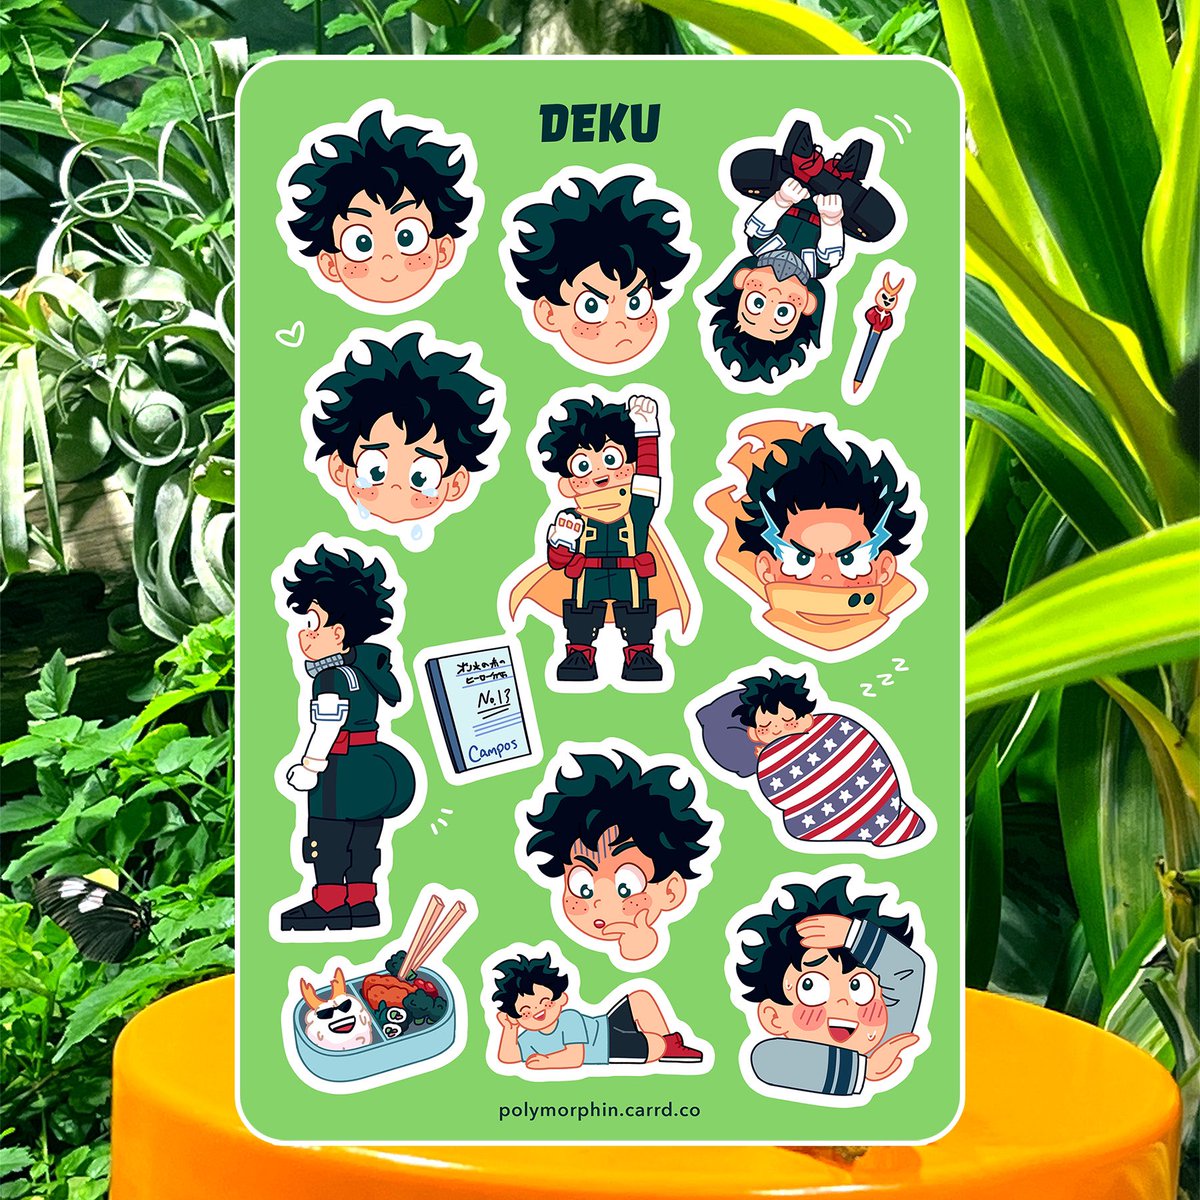 finished my deku sticker sheet!!! preorders open april 12th :) you can guess whose sticker sheet is next… #MyHeroAcademia #mha #bnha #bkdk